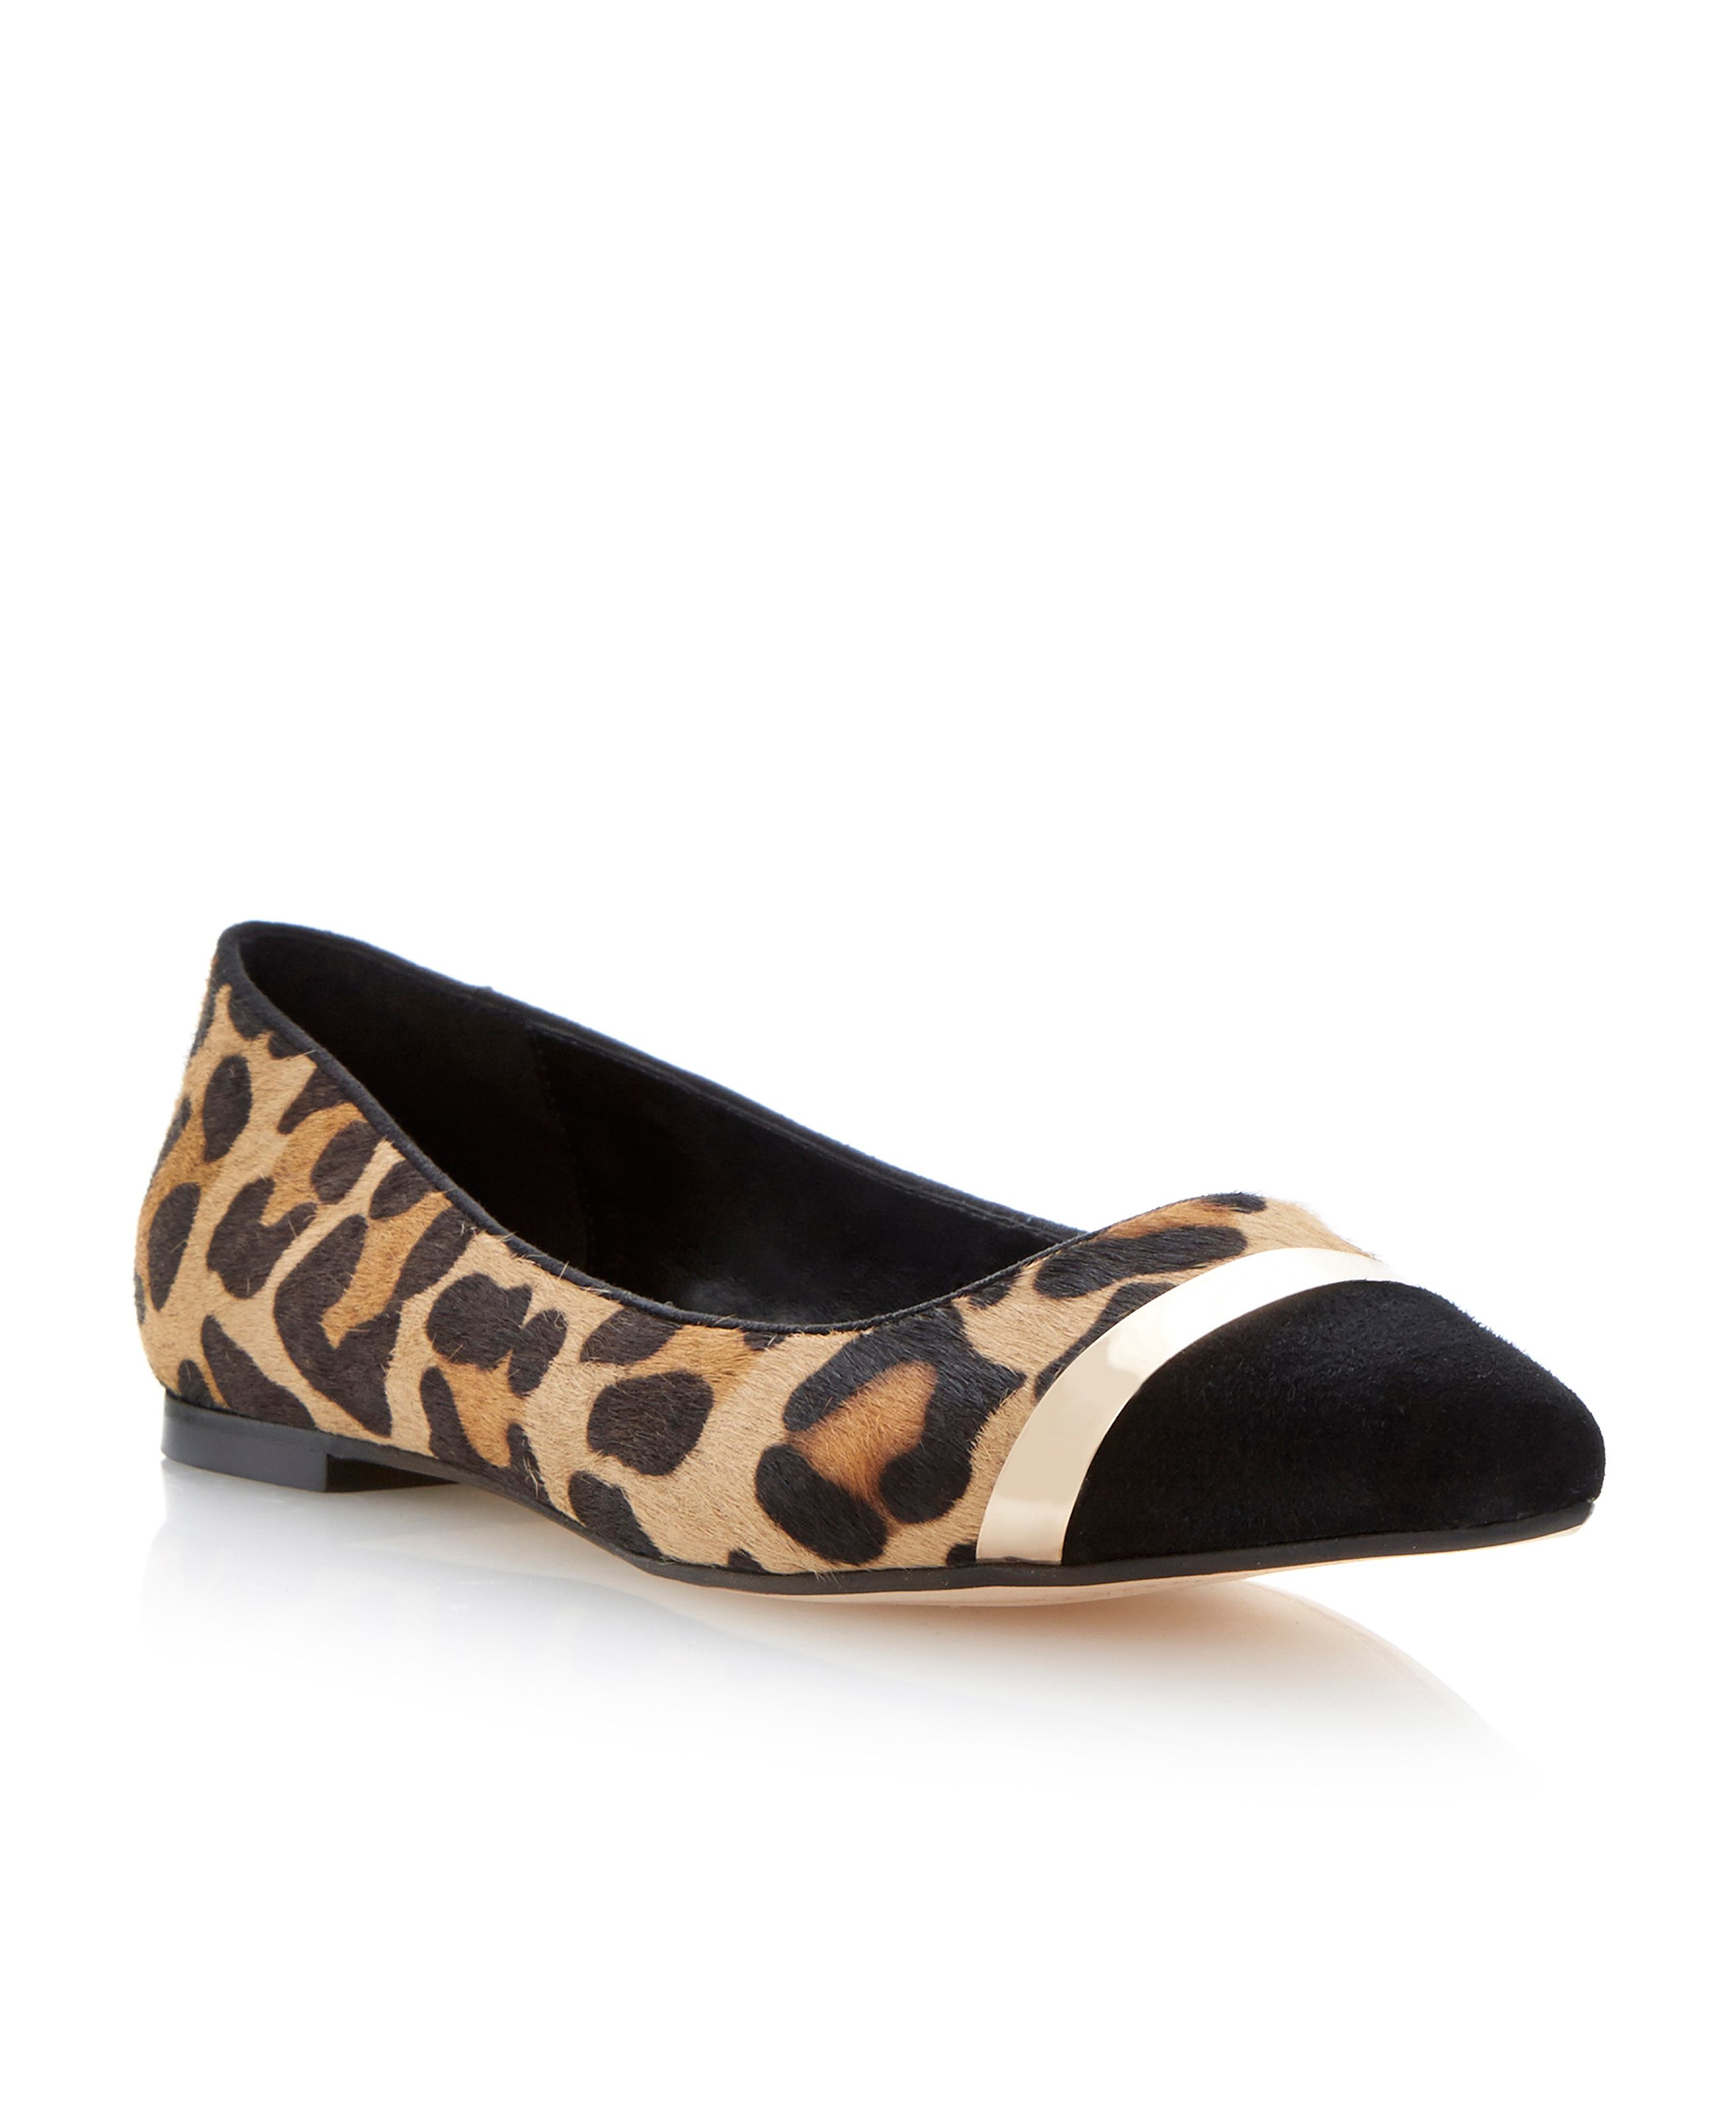 Dune Ameretto Pointed Toe Flat Shoes in Animal (Leopard Print)